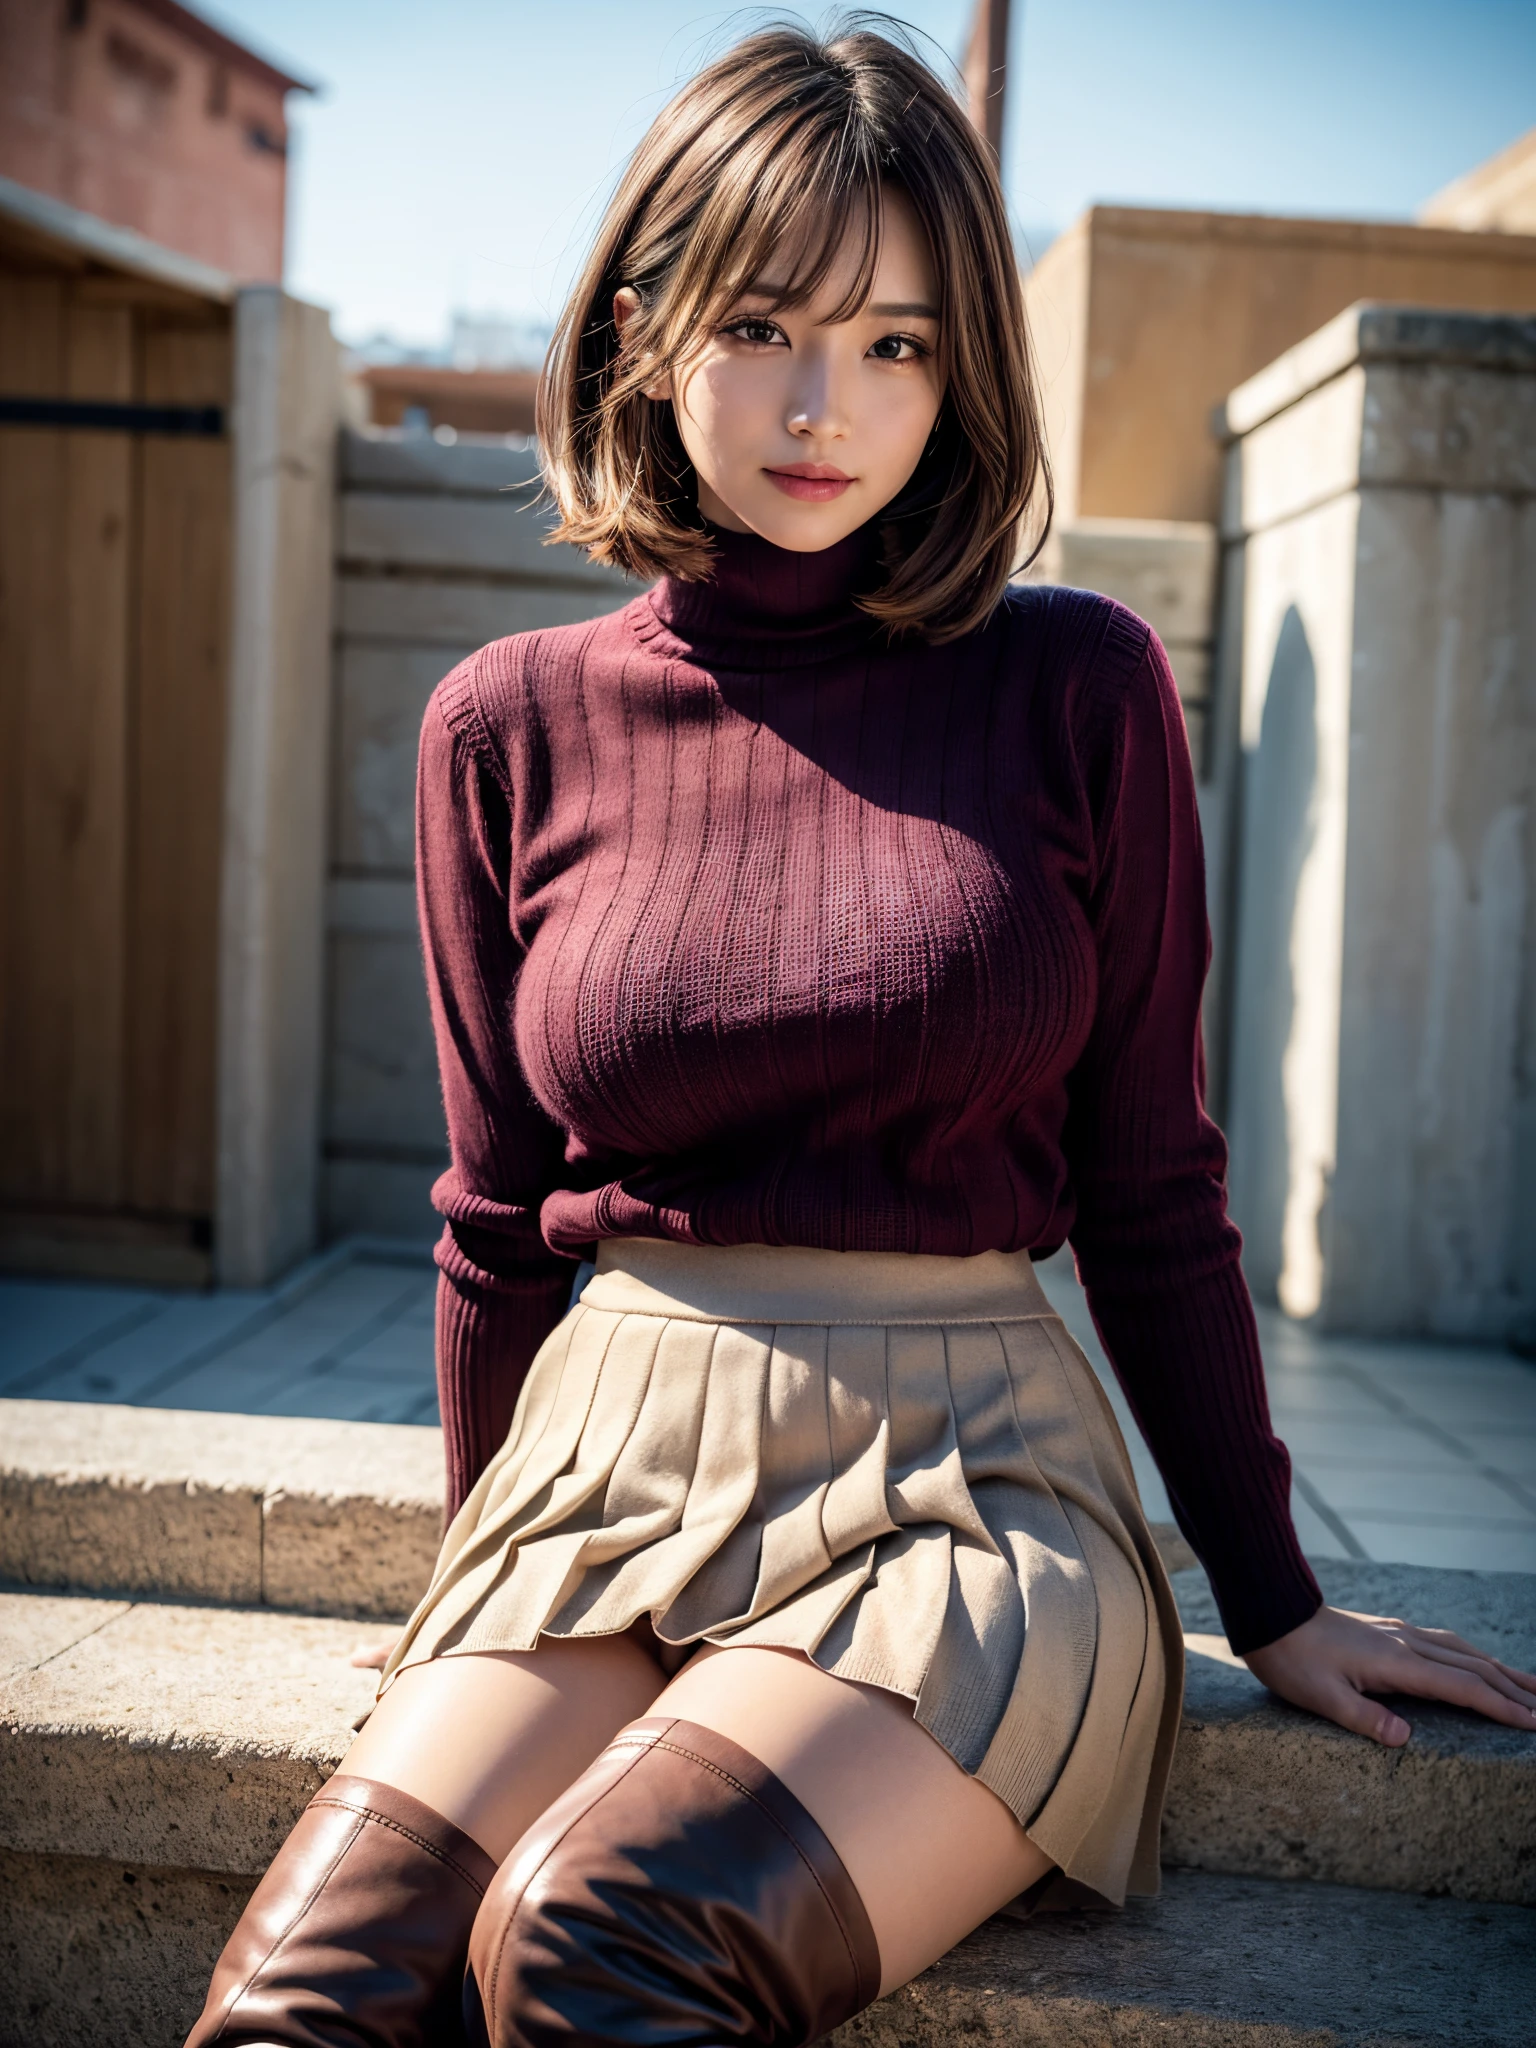 8K,Best Quality, masutepiece, ultra-detailliert, 超A high resolution, Photorealistic, Raw photo, absurderes, absolutely resolution, 1girl in, Solo,upperbody shot, Looking at Viewer,a Japanese young pretty woman, hyper cute face, Glamorous figure, Large breasts , Long bob hair ,Smile,(Pleated skirt, Cashmere sweater, Over-the-knee boots:1.3), exploring new destinations, cultural immersion, wanderlust, breathtaking sights, global adventures, memorable experiences ,Glossy lips, Double eyelids in both eyes, Natural makeup, long eyelashes, Glossy smooth light brown long bob hair, asymmetrical bangs, Shiny skin, central image, High resolution, high detailing, detailed hairstyle, Detailed face, spectacular movie lighting, Octane Rendering, Vibrant, Hyper realistic, Perfect limbs, Perfect Anatomy